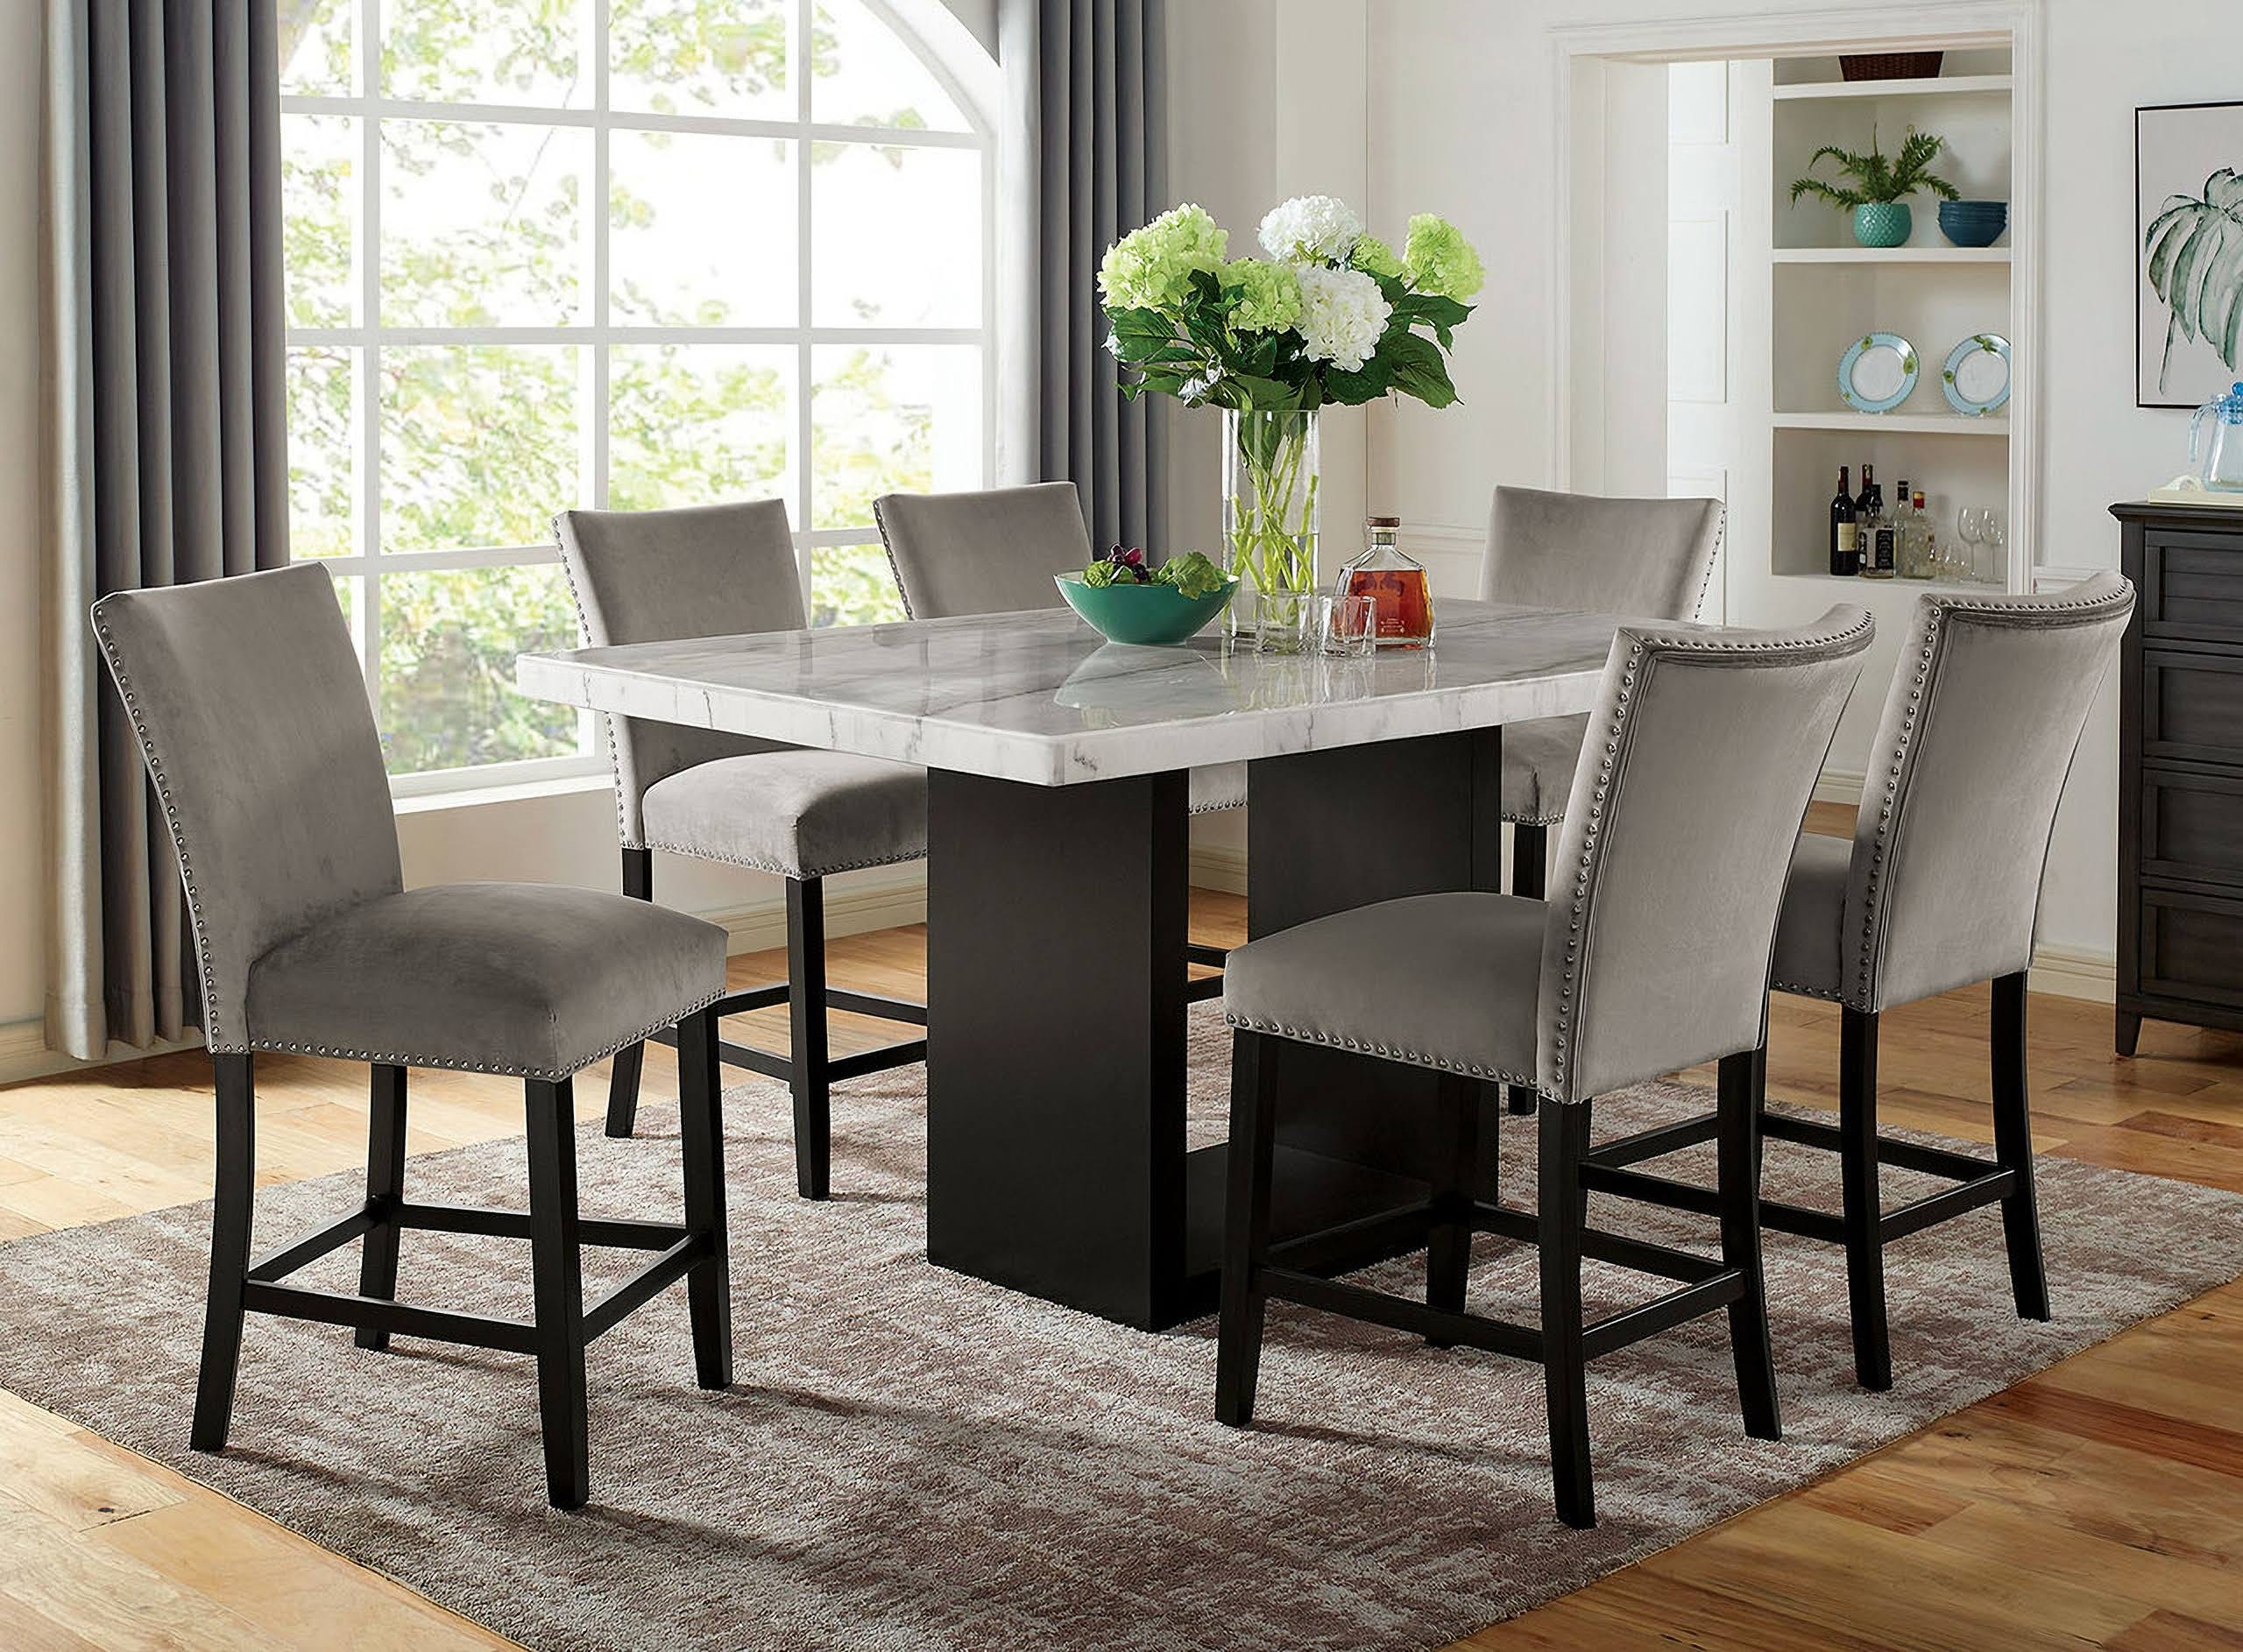 Kian Spacious White and Black Counter Height Dining Table | Image